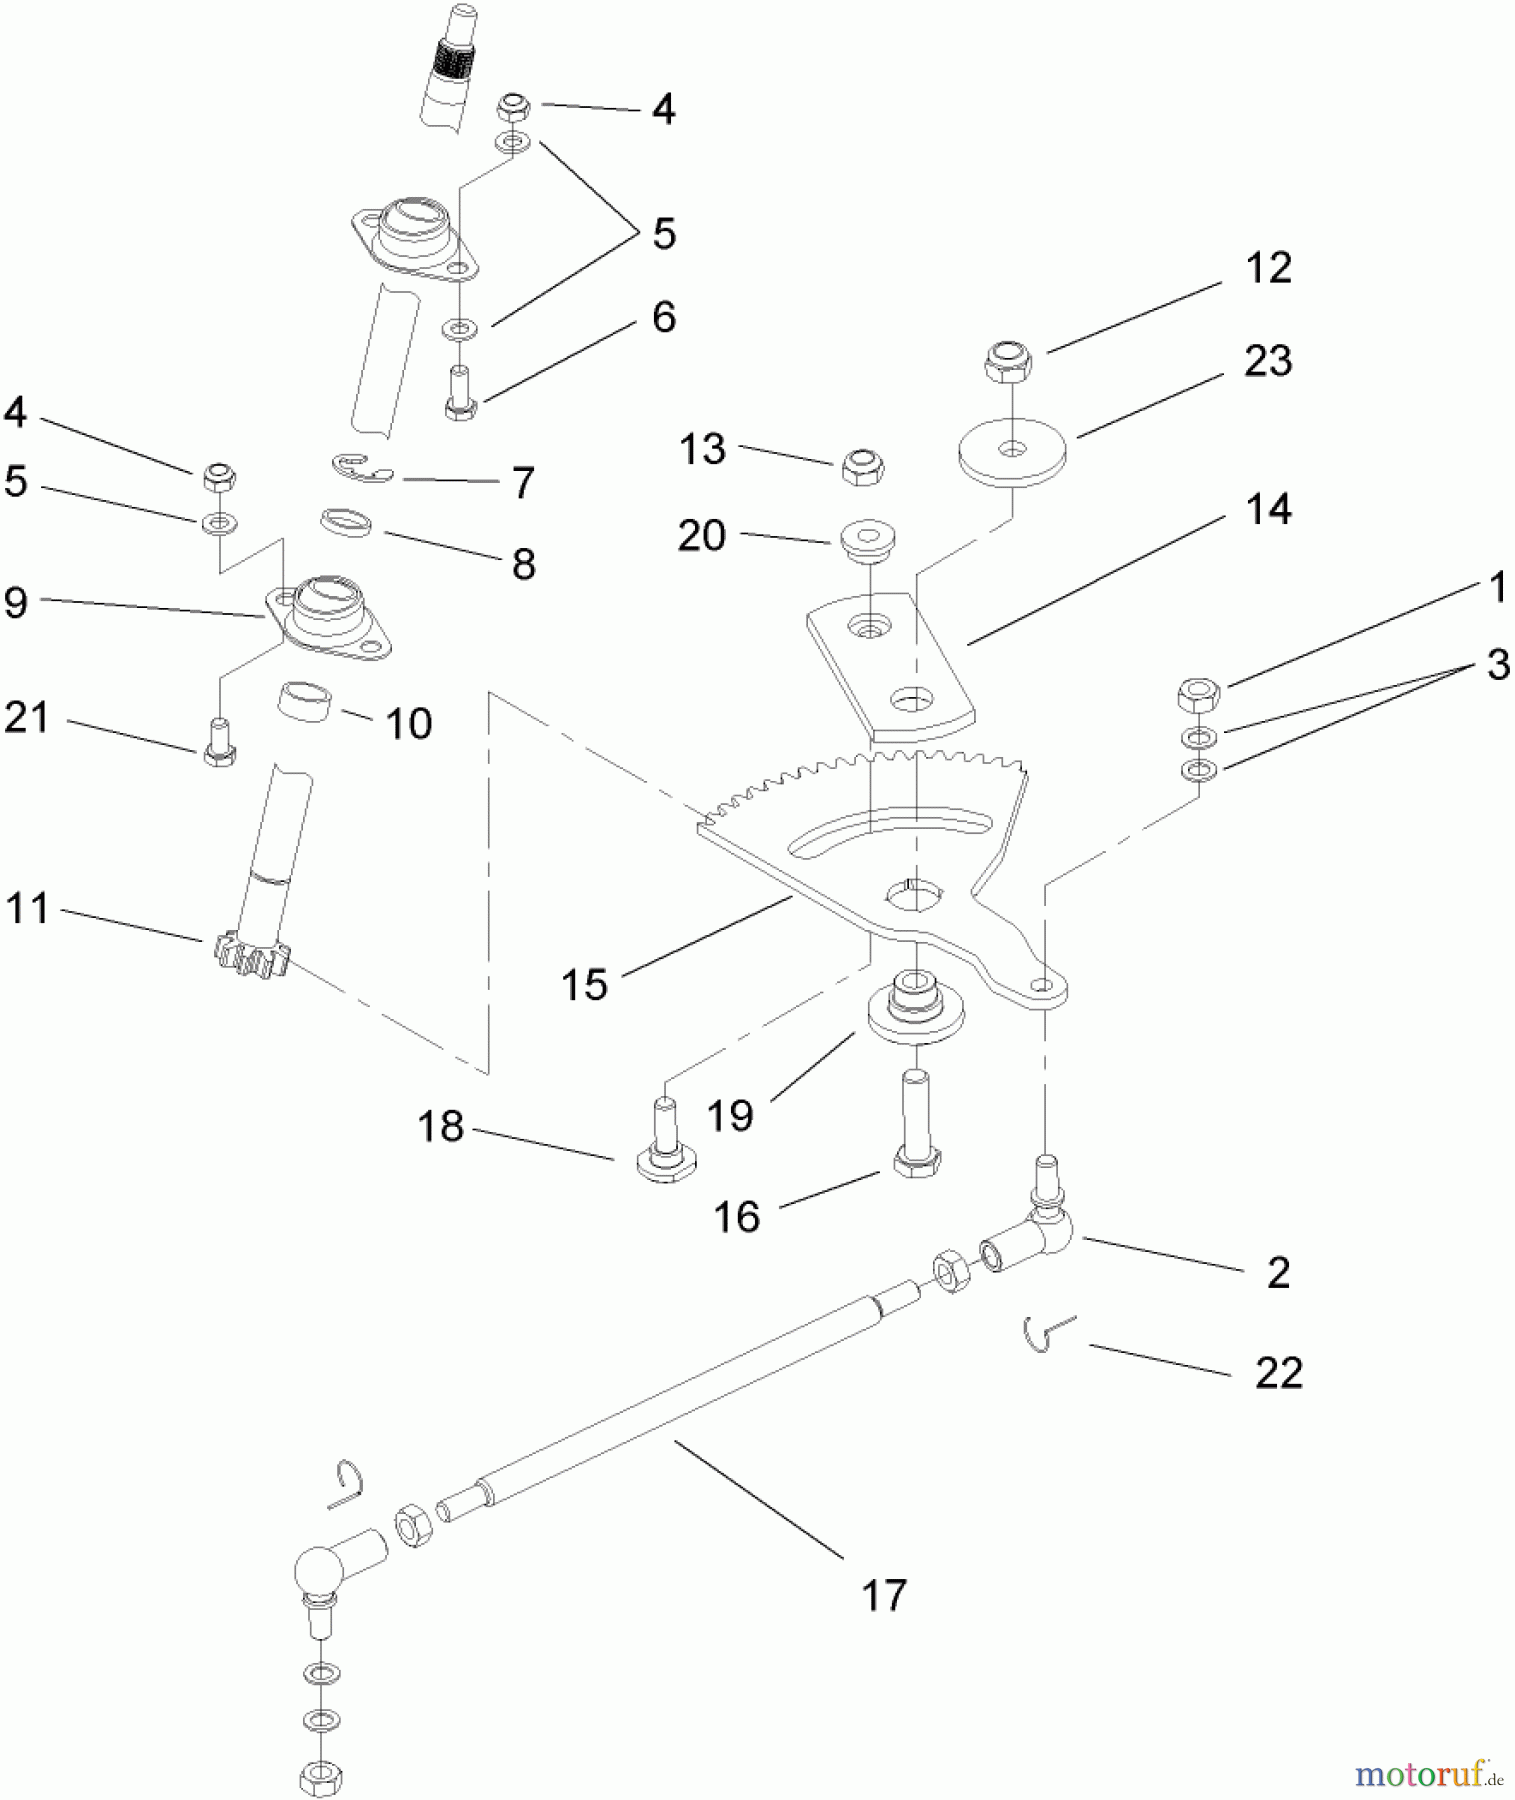  Toro Neu Mowers, Lawn & Garden Tractor Seite 1 74582 (DH 210) - Toro DH 210 Lawn Tractor, 2009 (290000001-290999999) STEERING ASSEMBLY